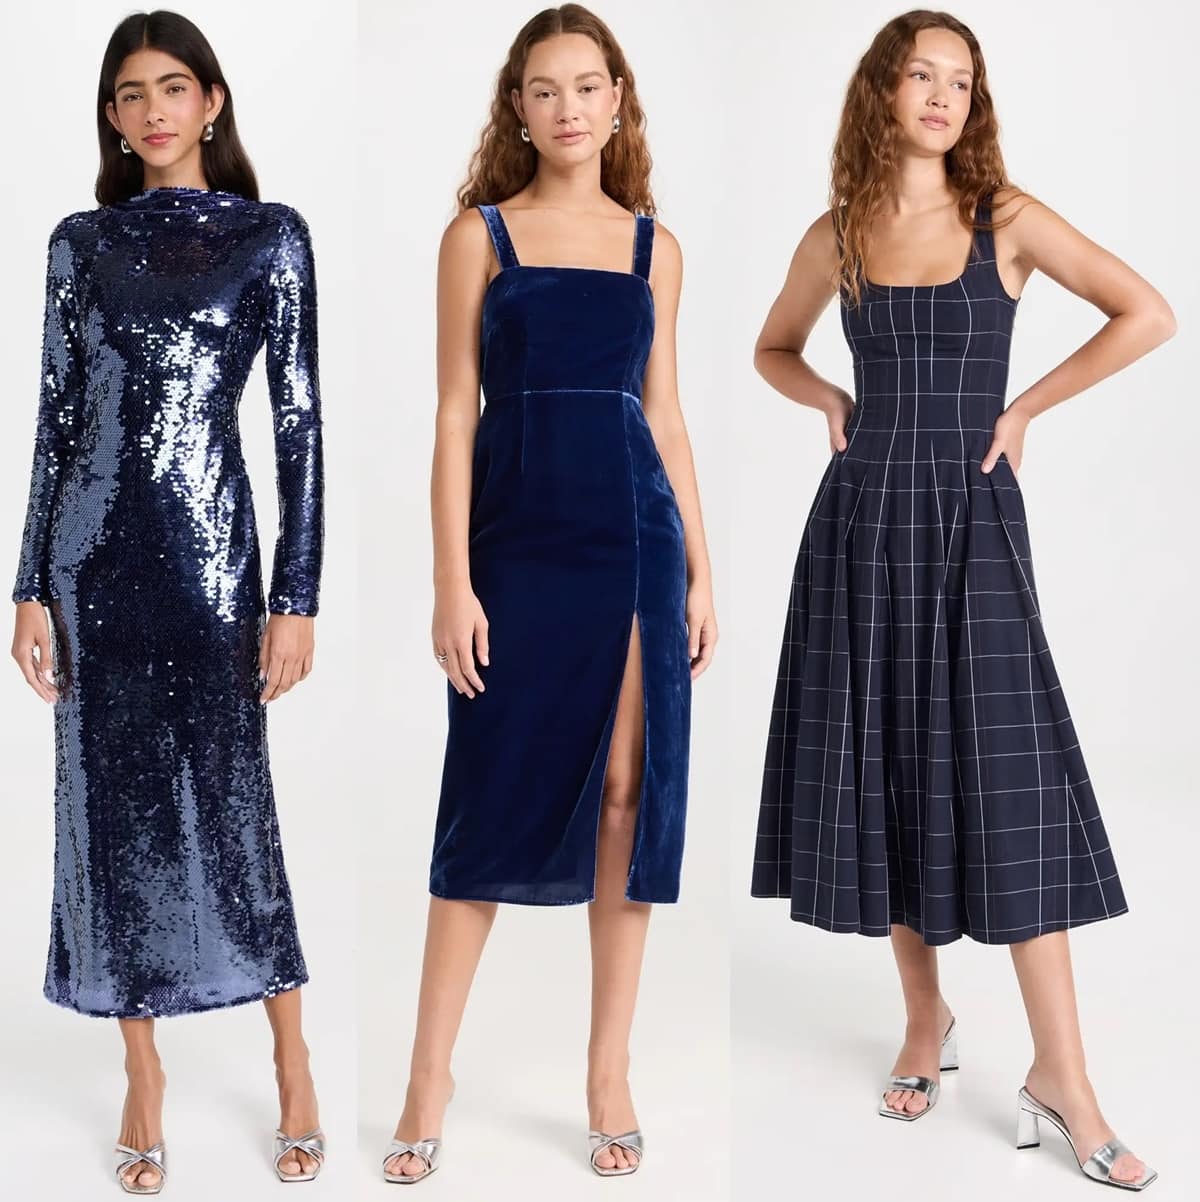 To transition from a workwear look to an occasion-ready ensemble, consider pairing your navy dress with silver sparkly shoes